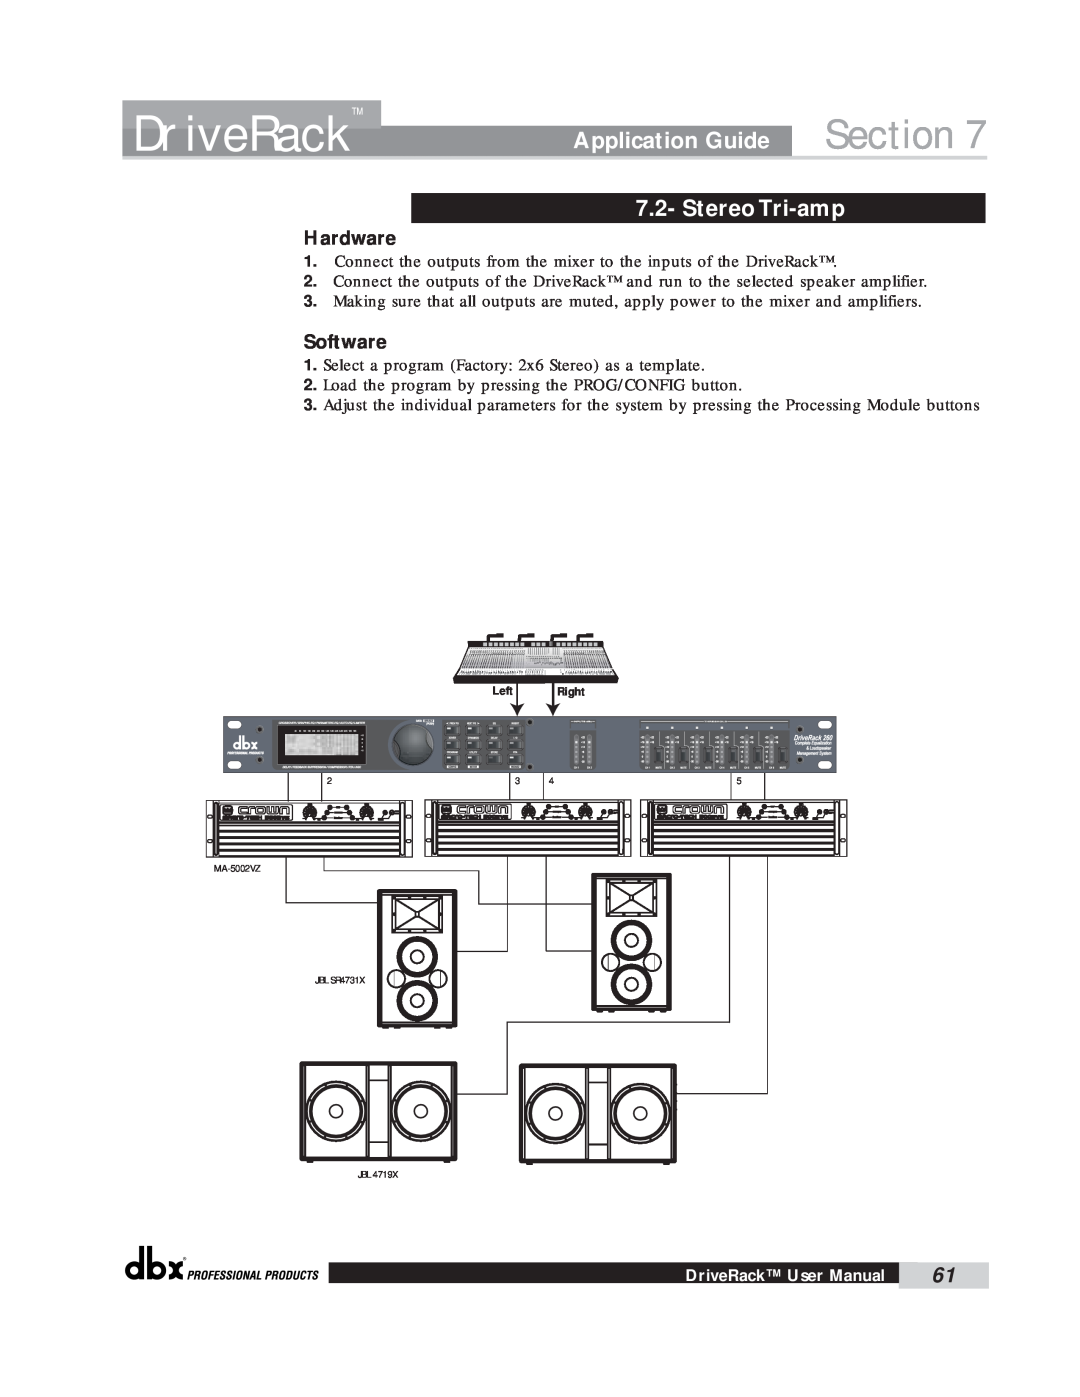 dbx Pro 260 user manual Section, Stereo Tri-amp, DriveRack, Application Guide, Hardware, Software 